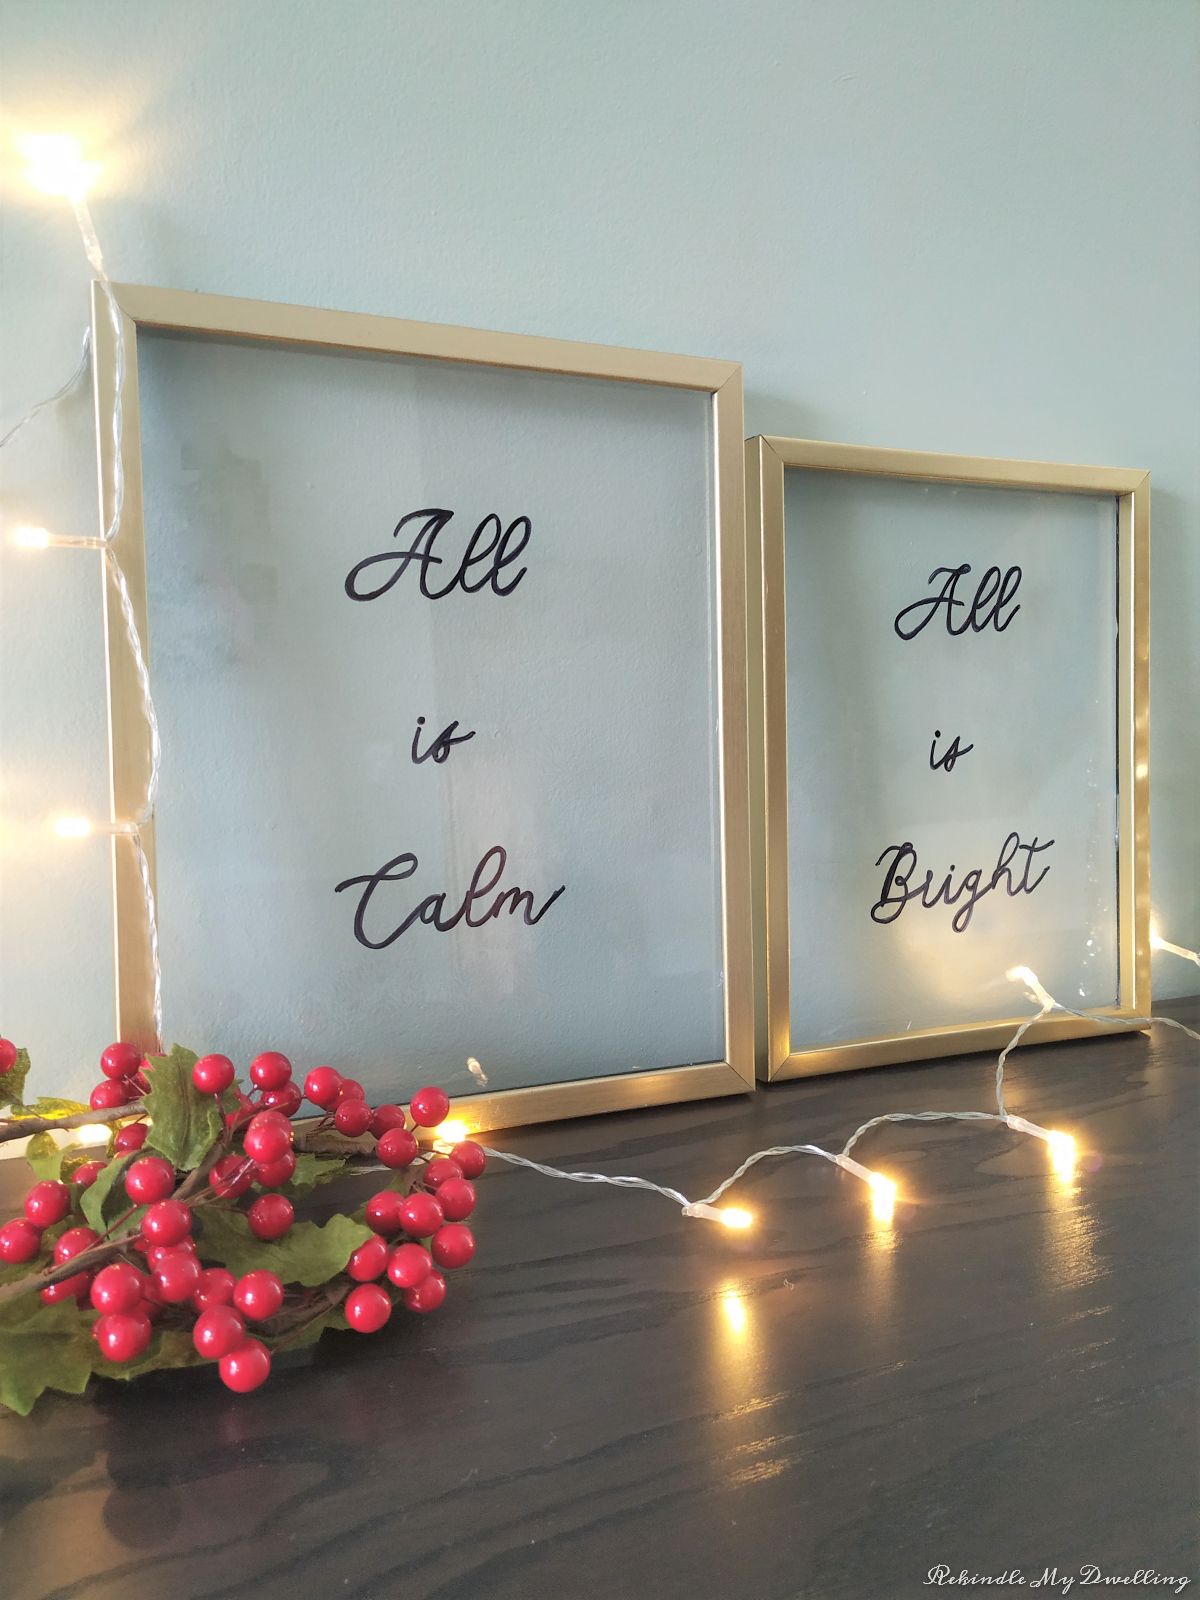 Framed glass floating signs next to lights and holly.